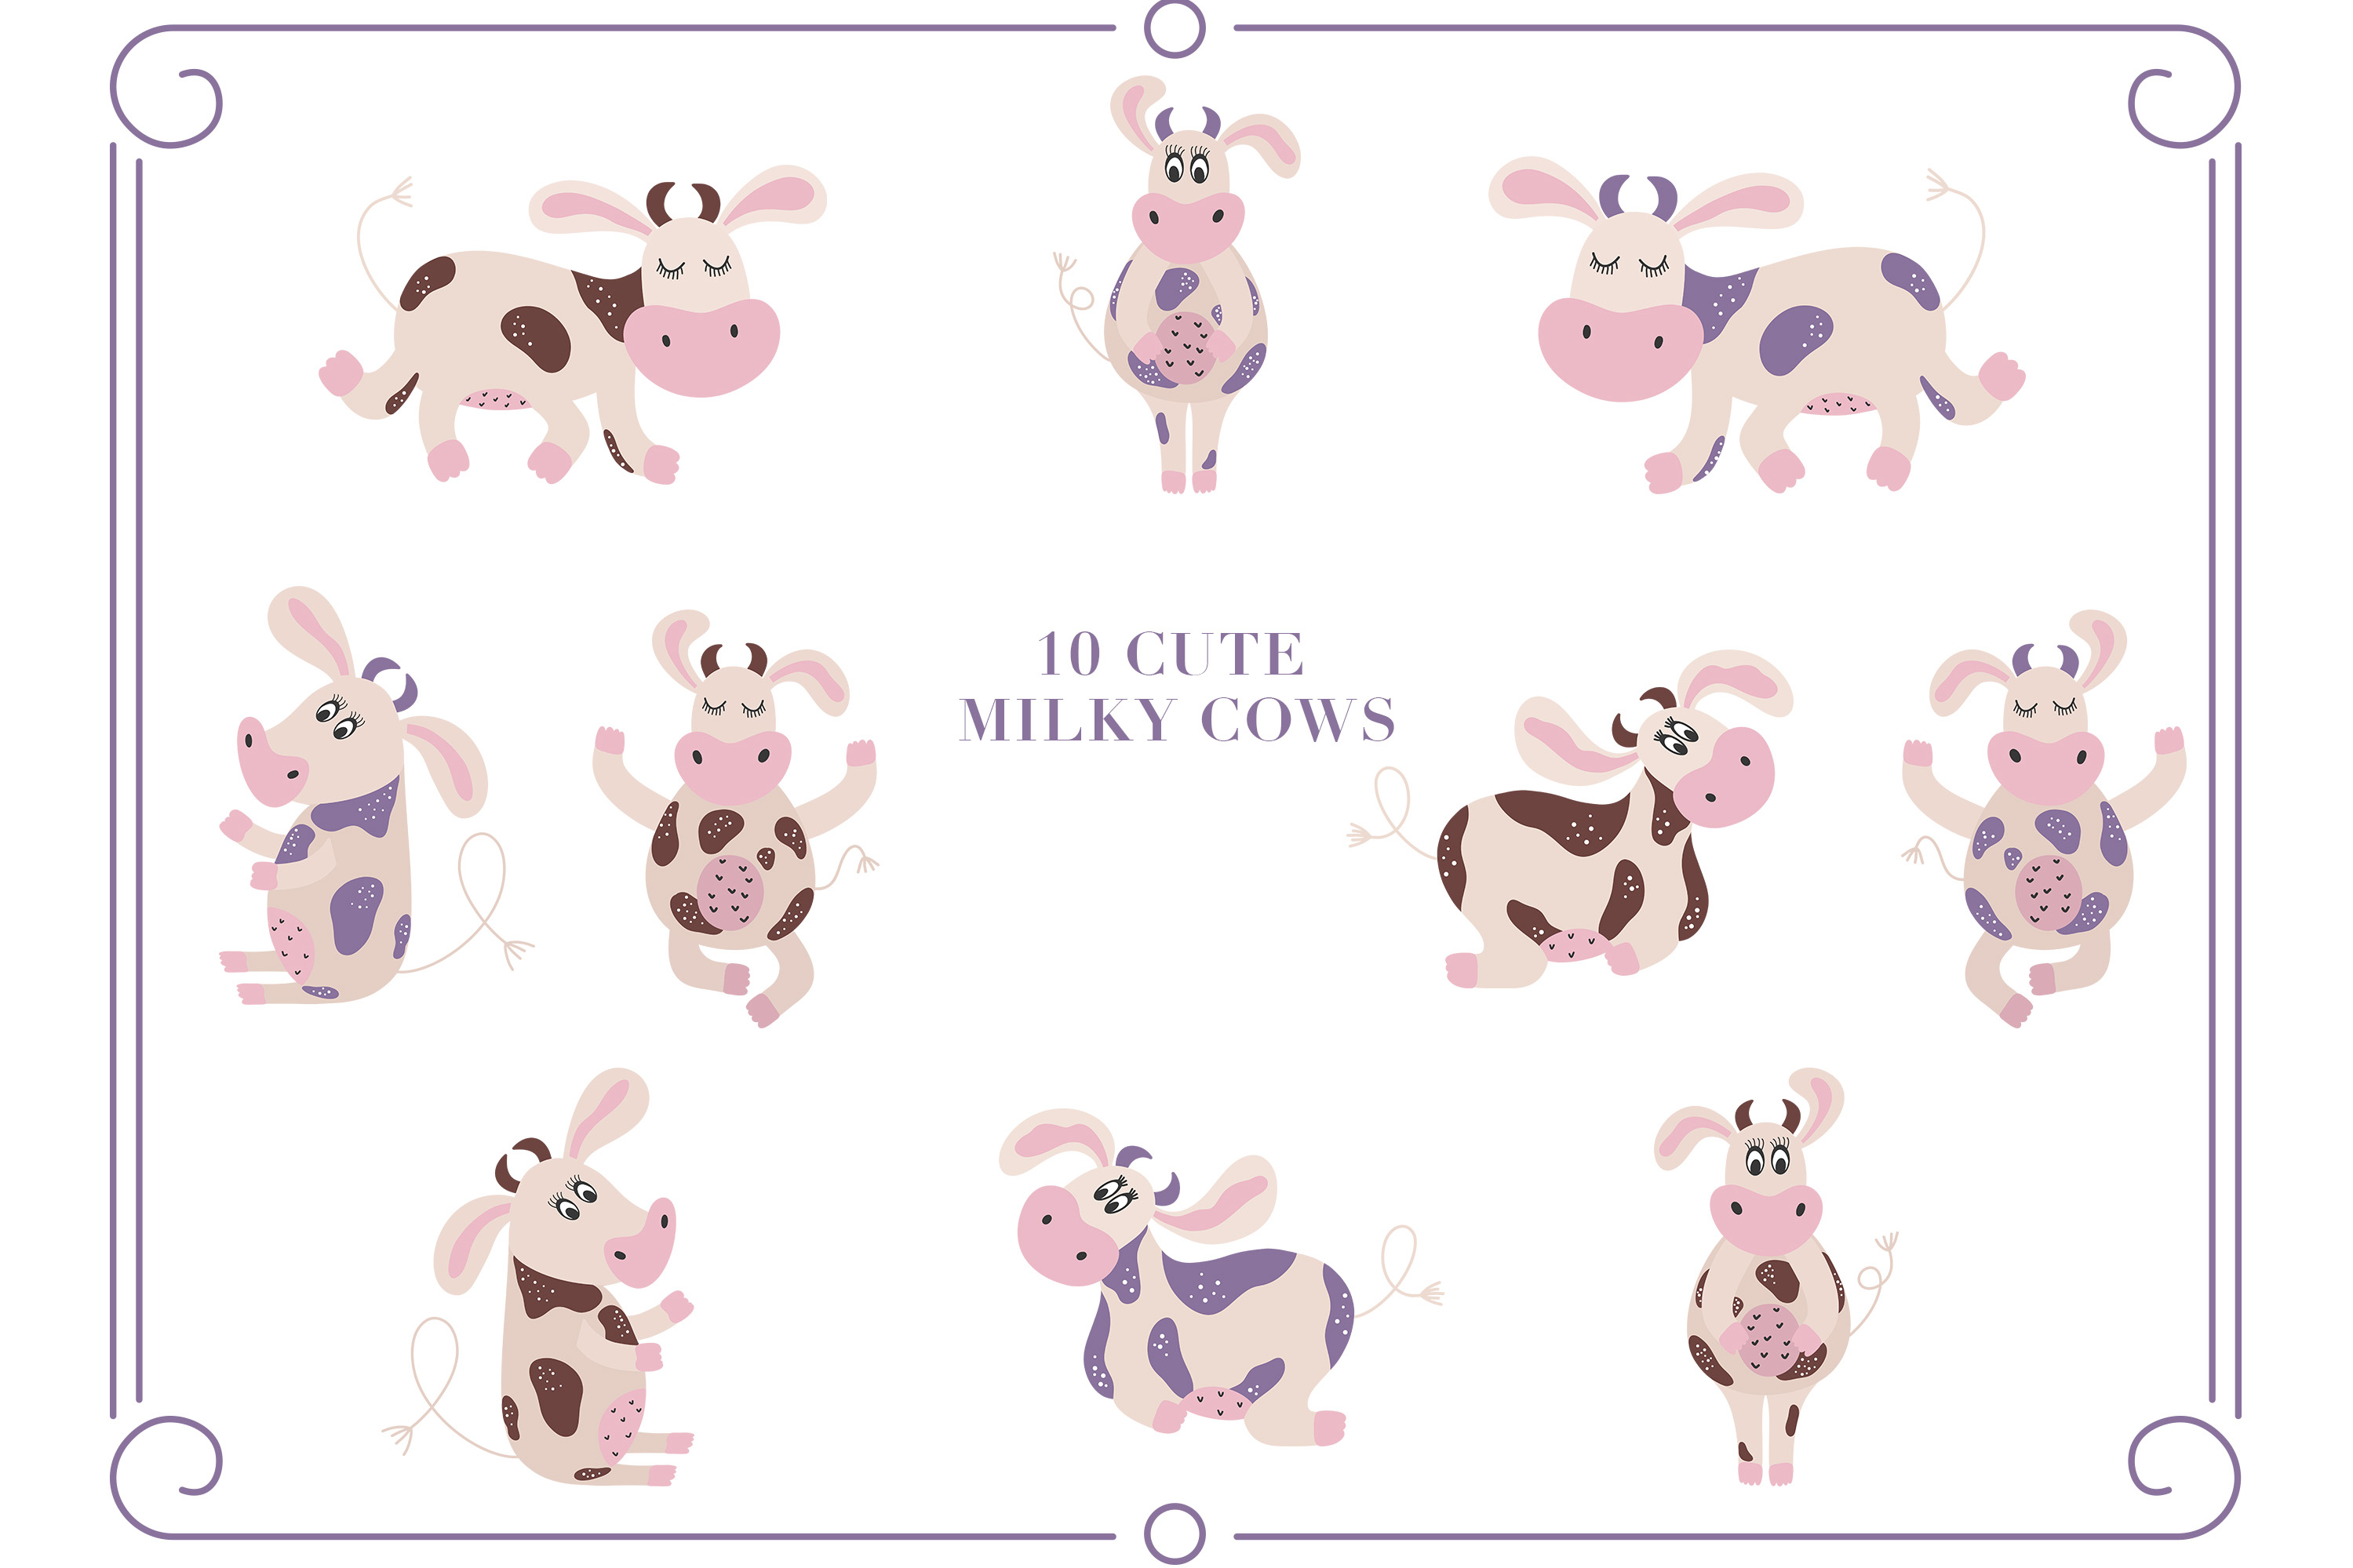 Milky Cows Cute Illustrations elements.